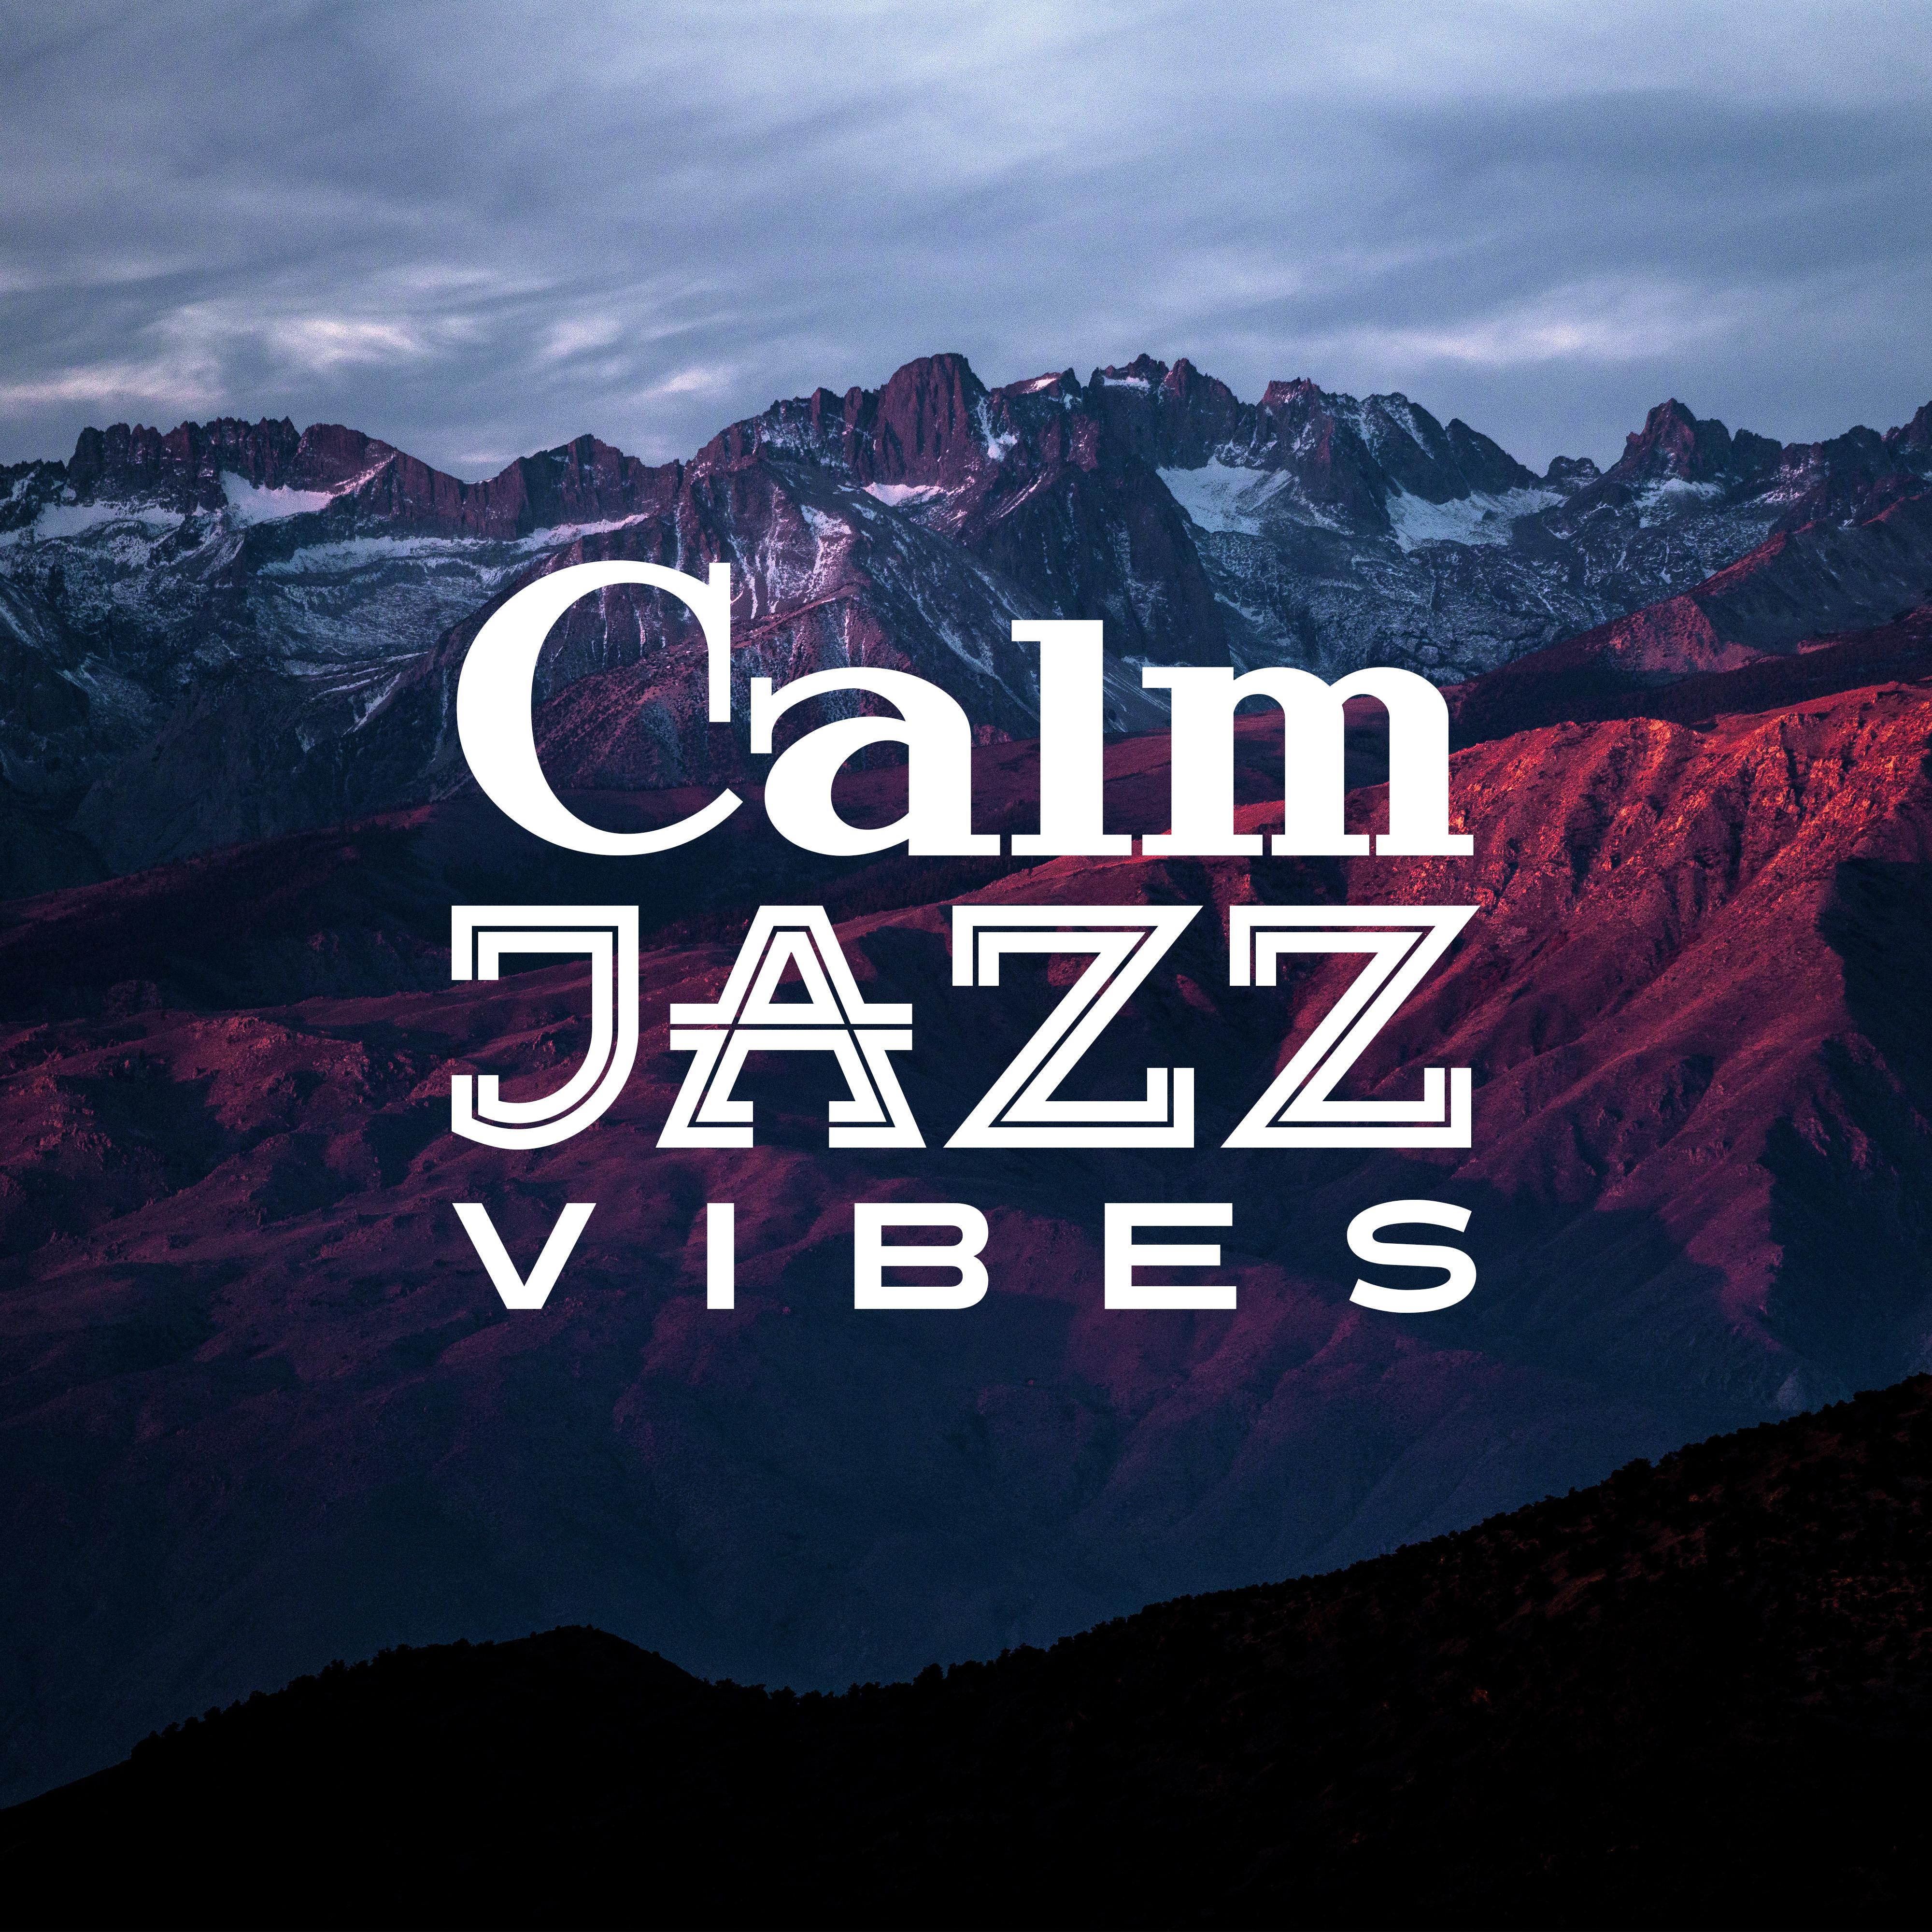 Calm Jazz  Vibes  Relaxing Jazz Music, Instrumental Lounge, Ambient Piano Session, Melancholy